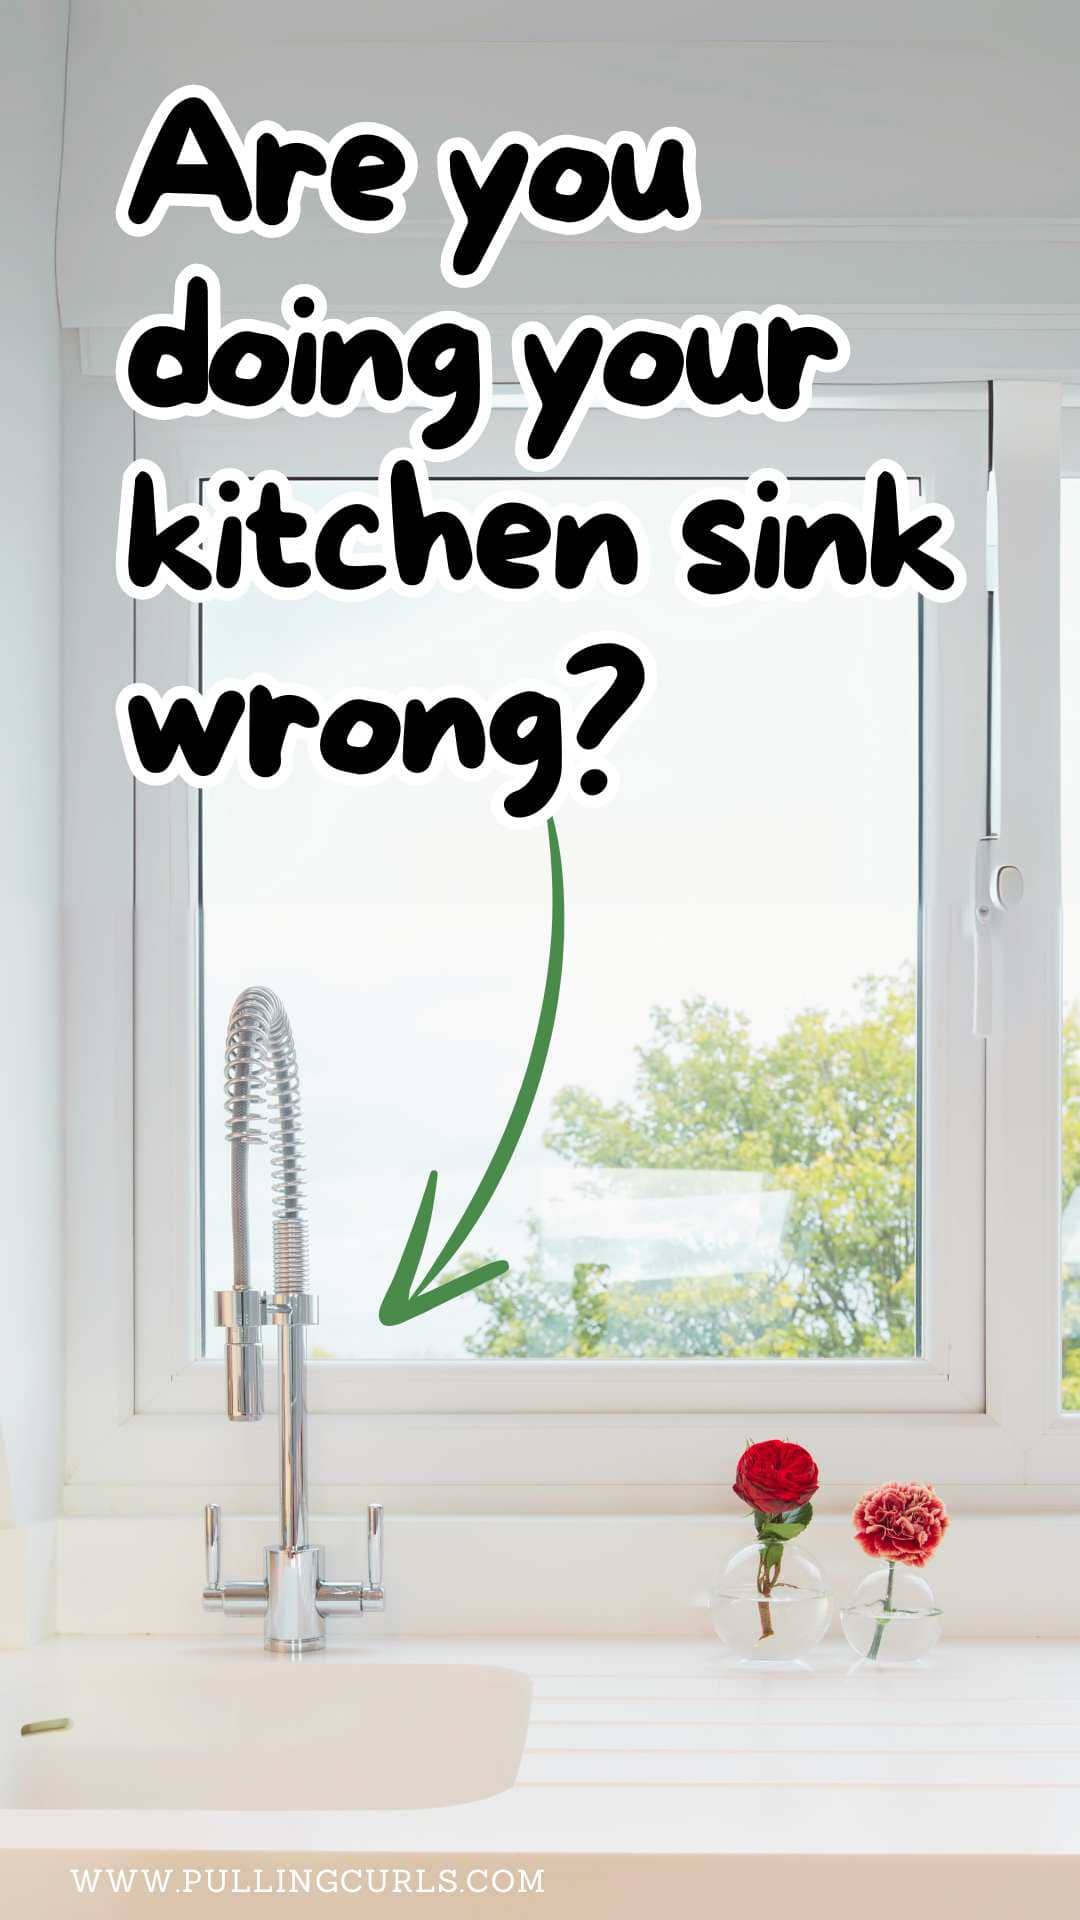 Looking to spruce up your kitchen? Check out our fabulous collection of kitchen sink hacks 🥄! From creative organizational tips to fun DIY projects, we've got you covered! Say goodbye to clutter and hello to a beautifully organized sink area💚! via @pullingcurls